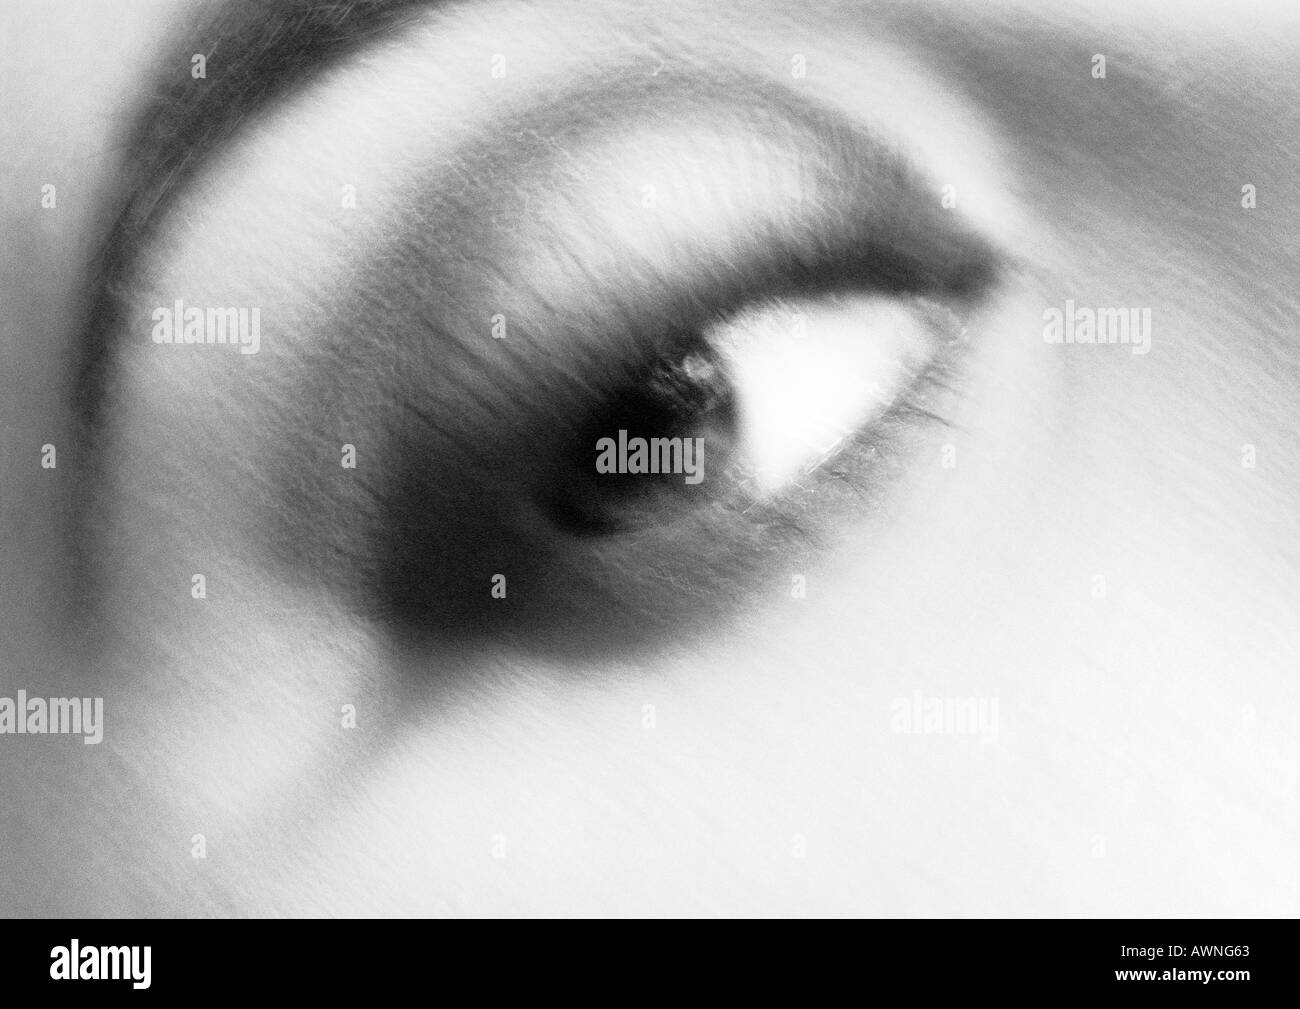 Woman's eye looking right, blurred black and white. Stock Photo